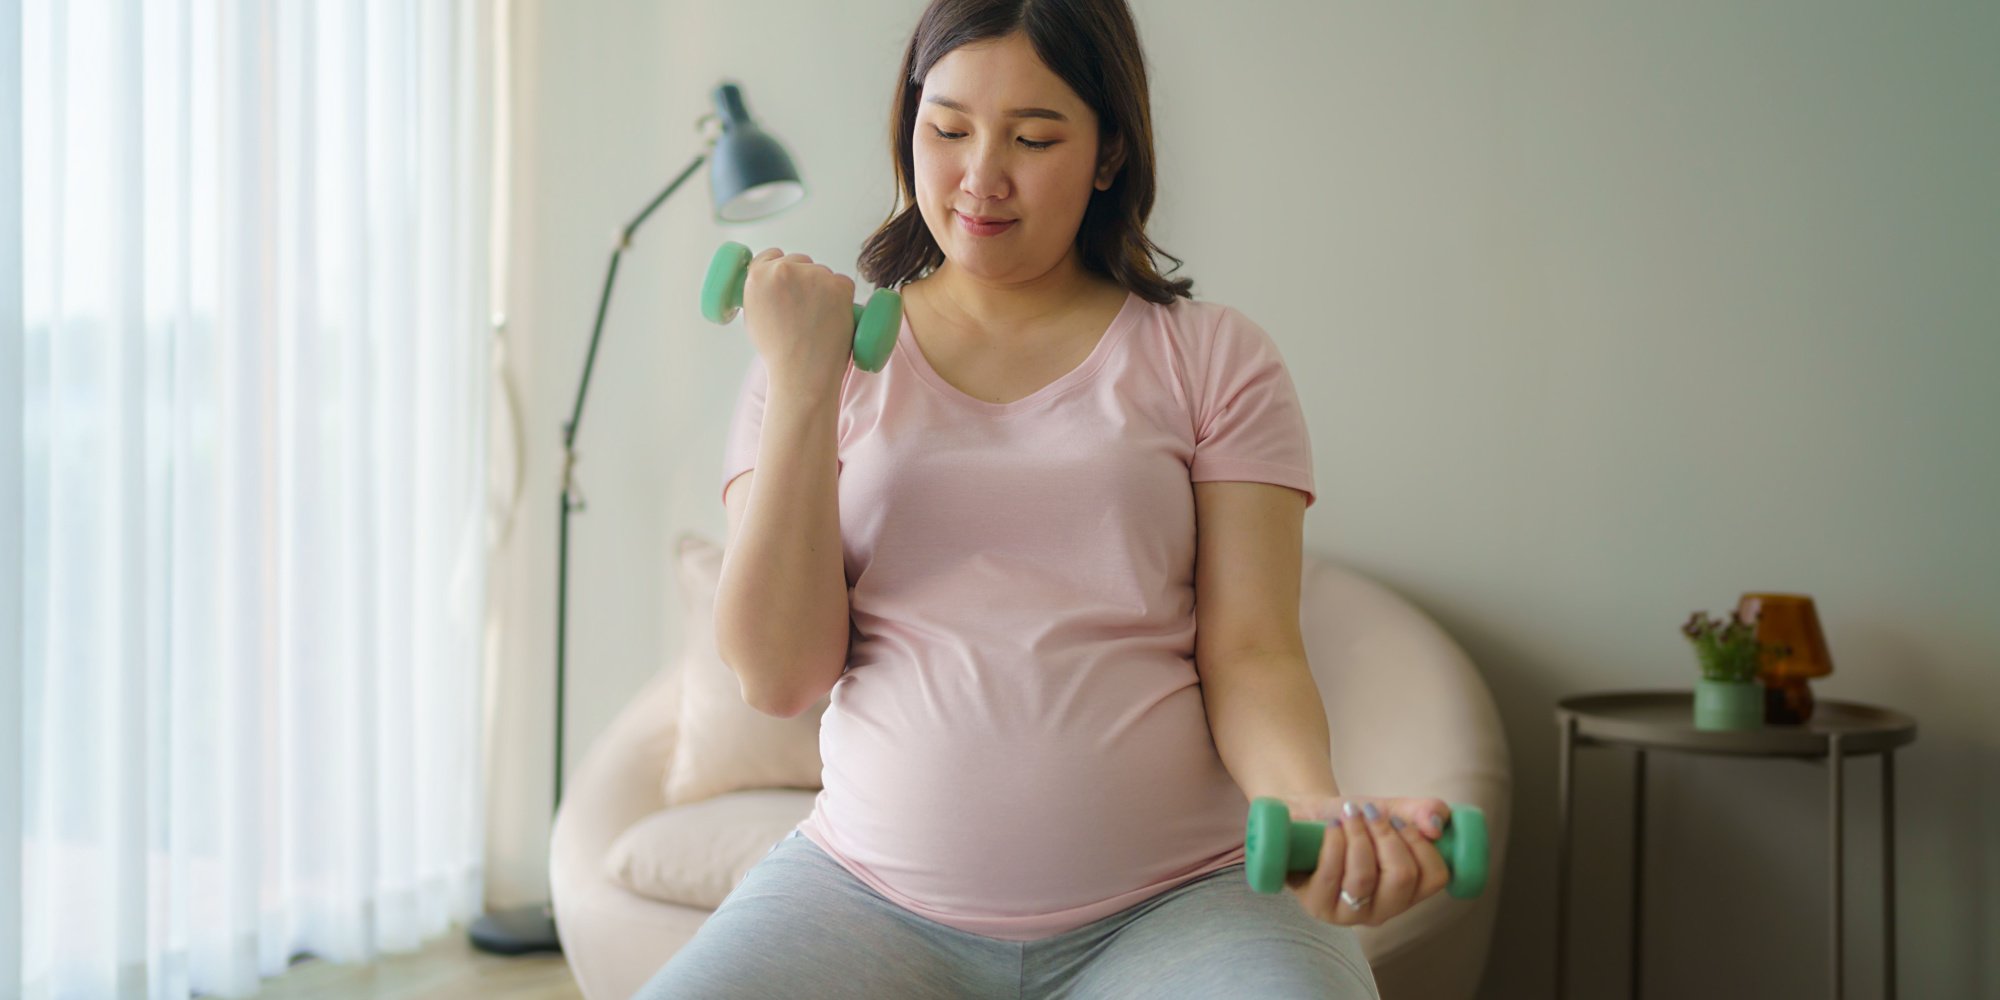 How to Safely Lift Weights While You Are Pregnant